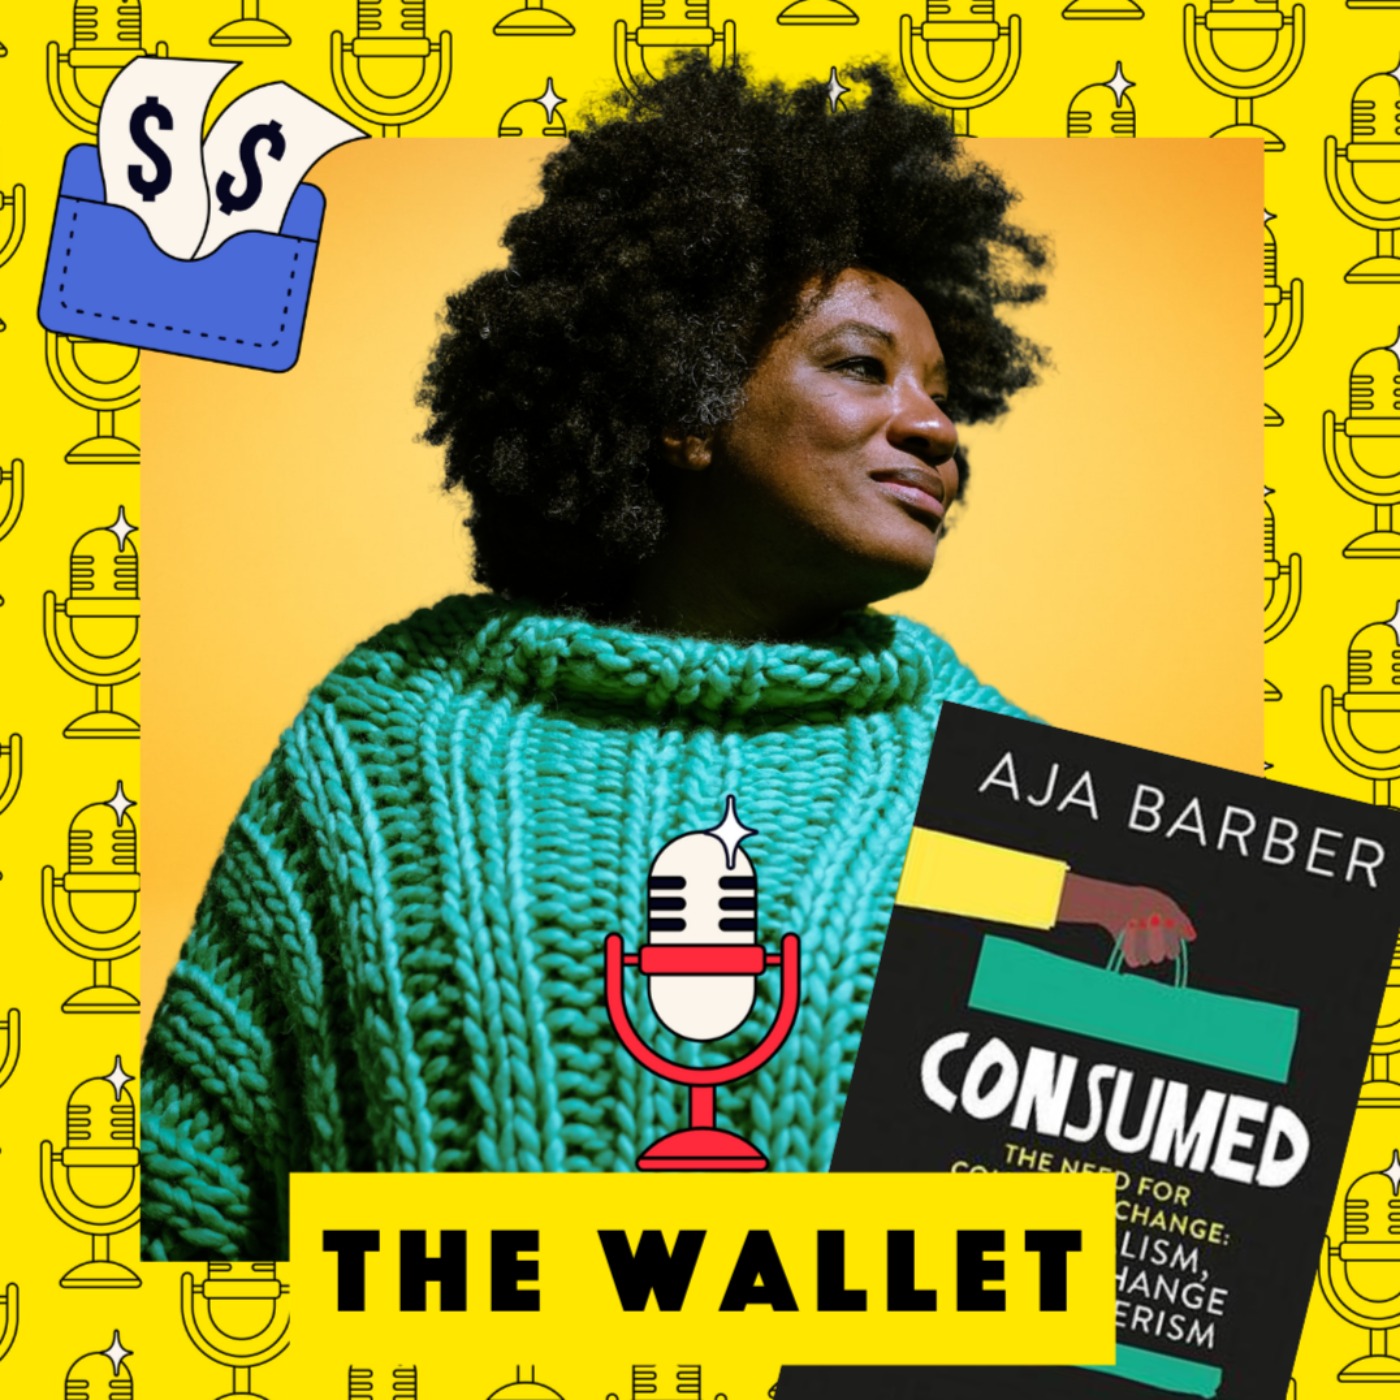 How can we challenge the culture of consumerism and quit fast fashion? With Aja Barber